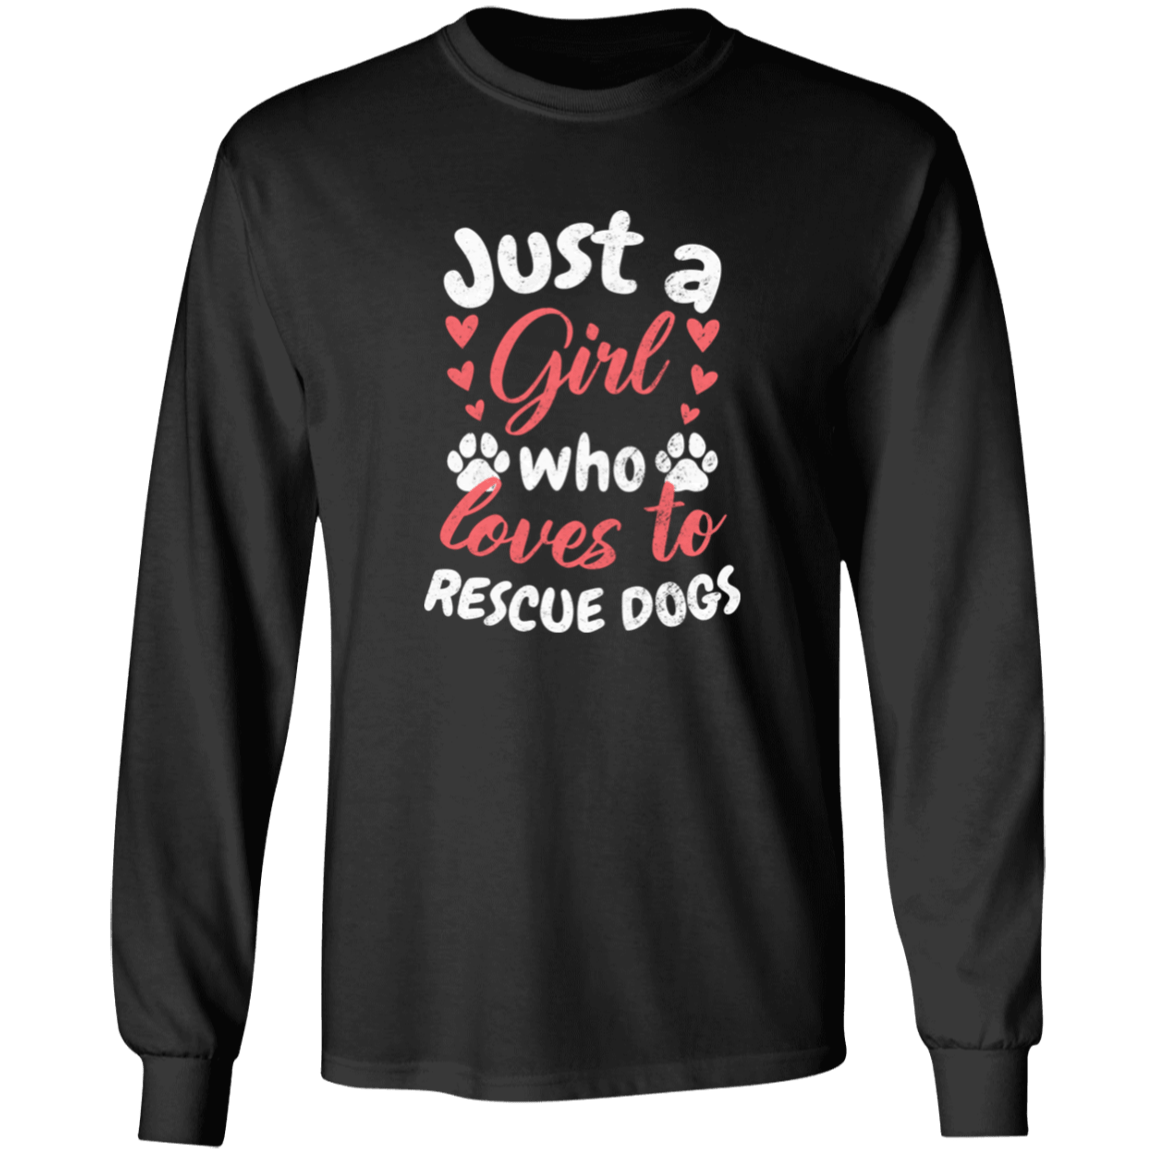 Just A Girl Who Loves To Rescue Dogs - Long Sleeve T Shirt.